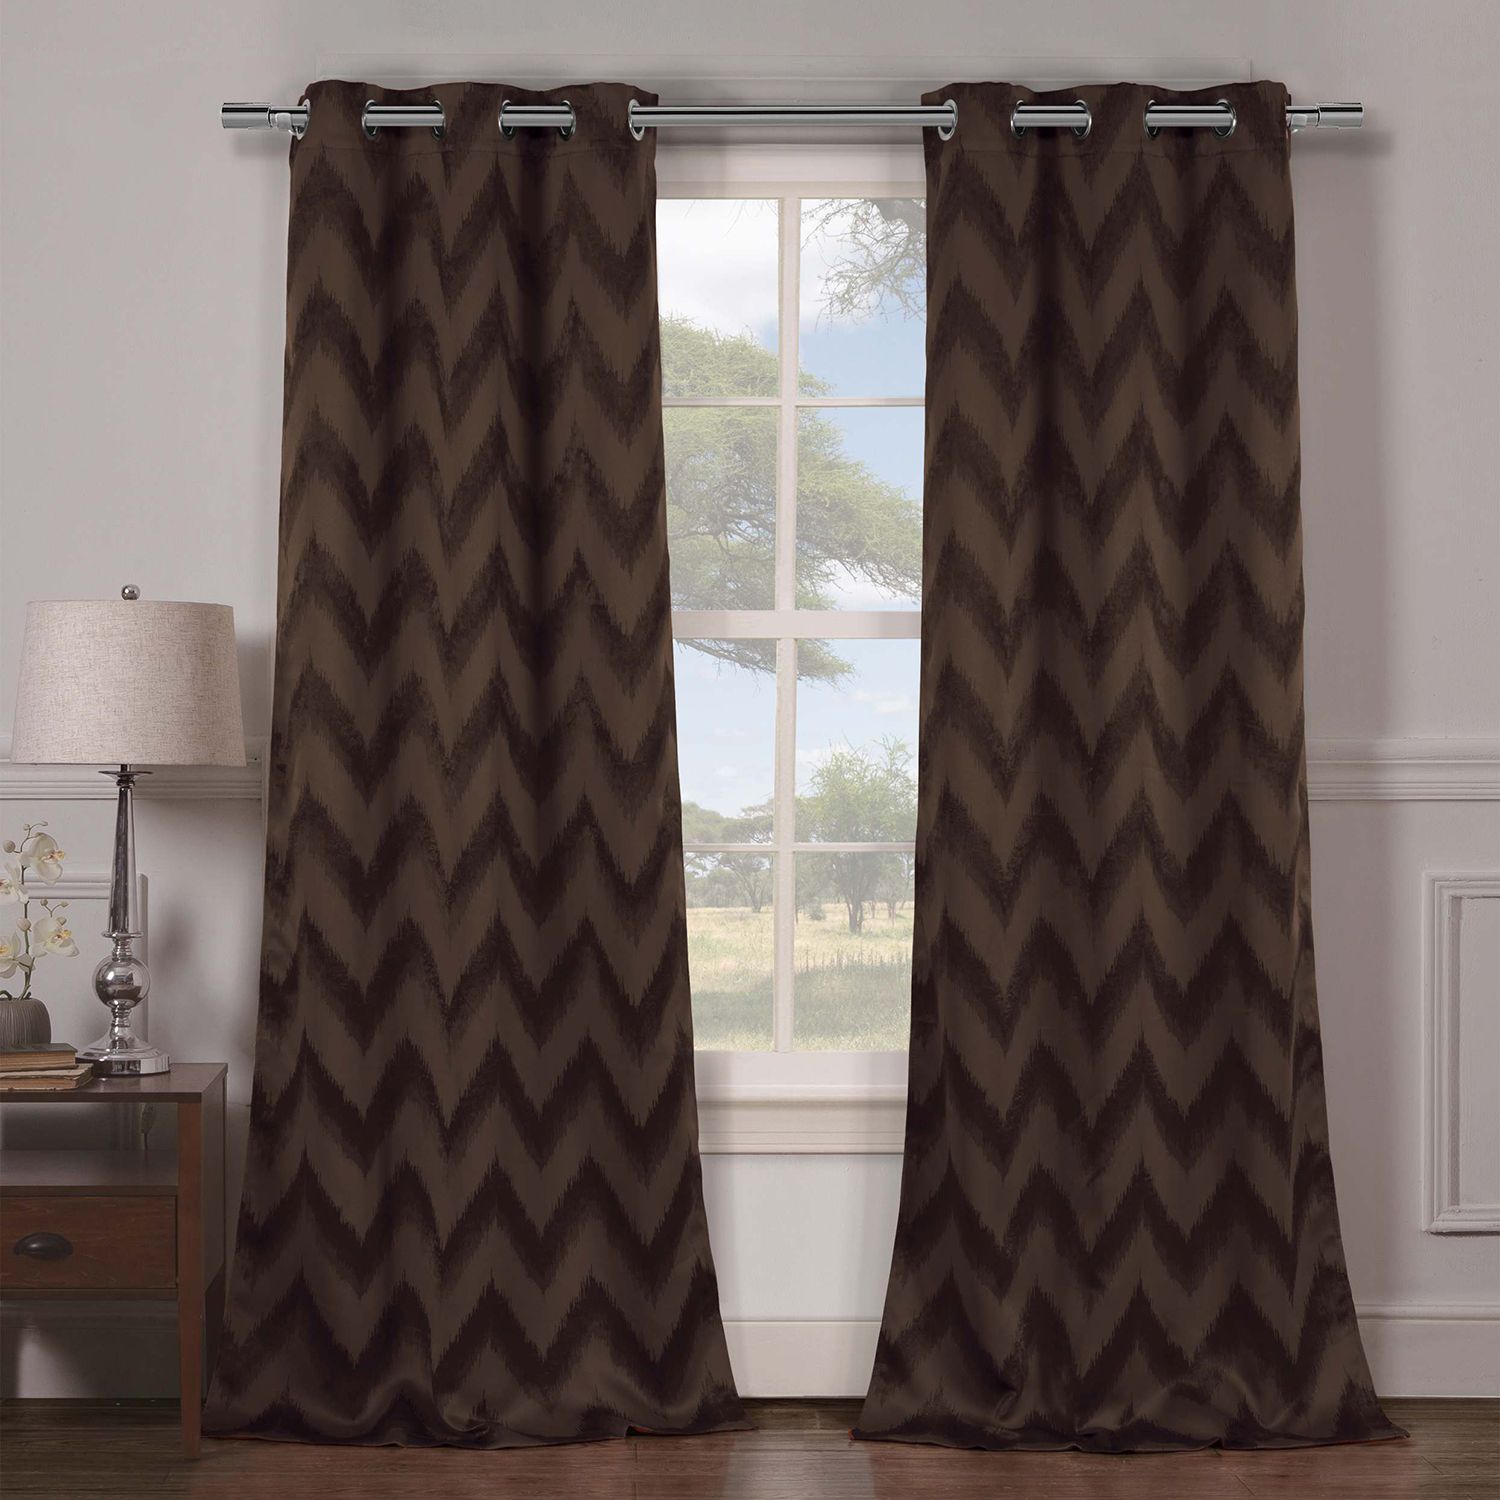 Image for Duck River Textile Lysanna Printed Blackout 2-pack Window Curtain Set at Kohl's.